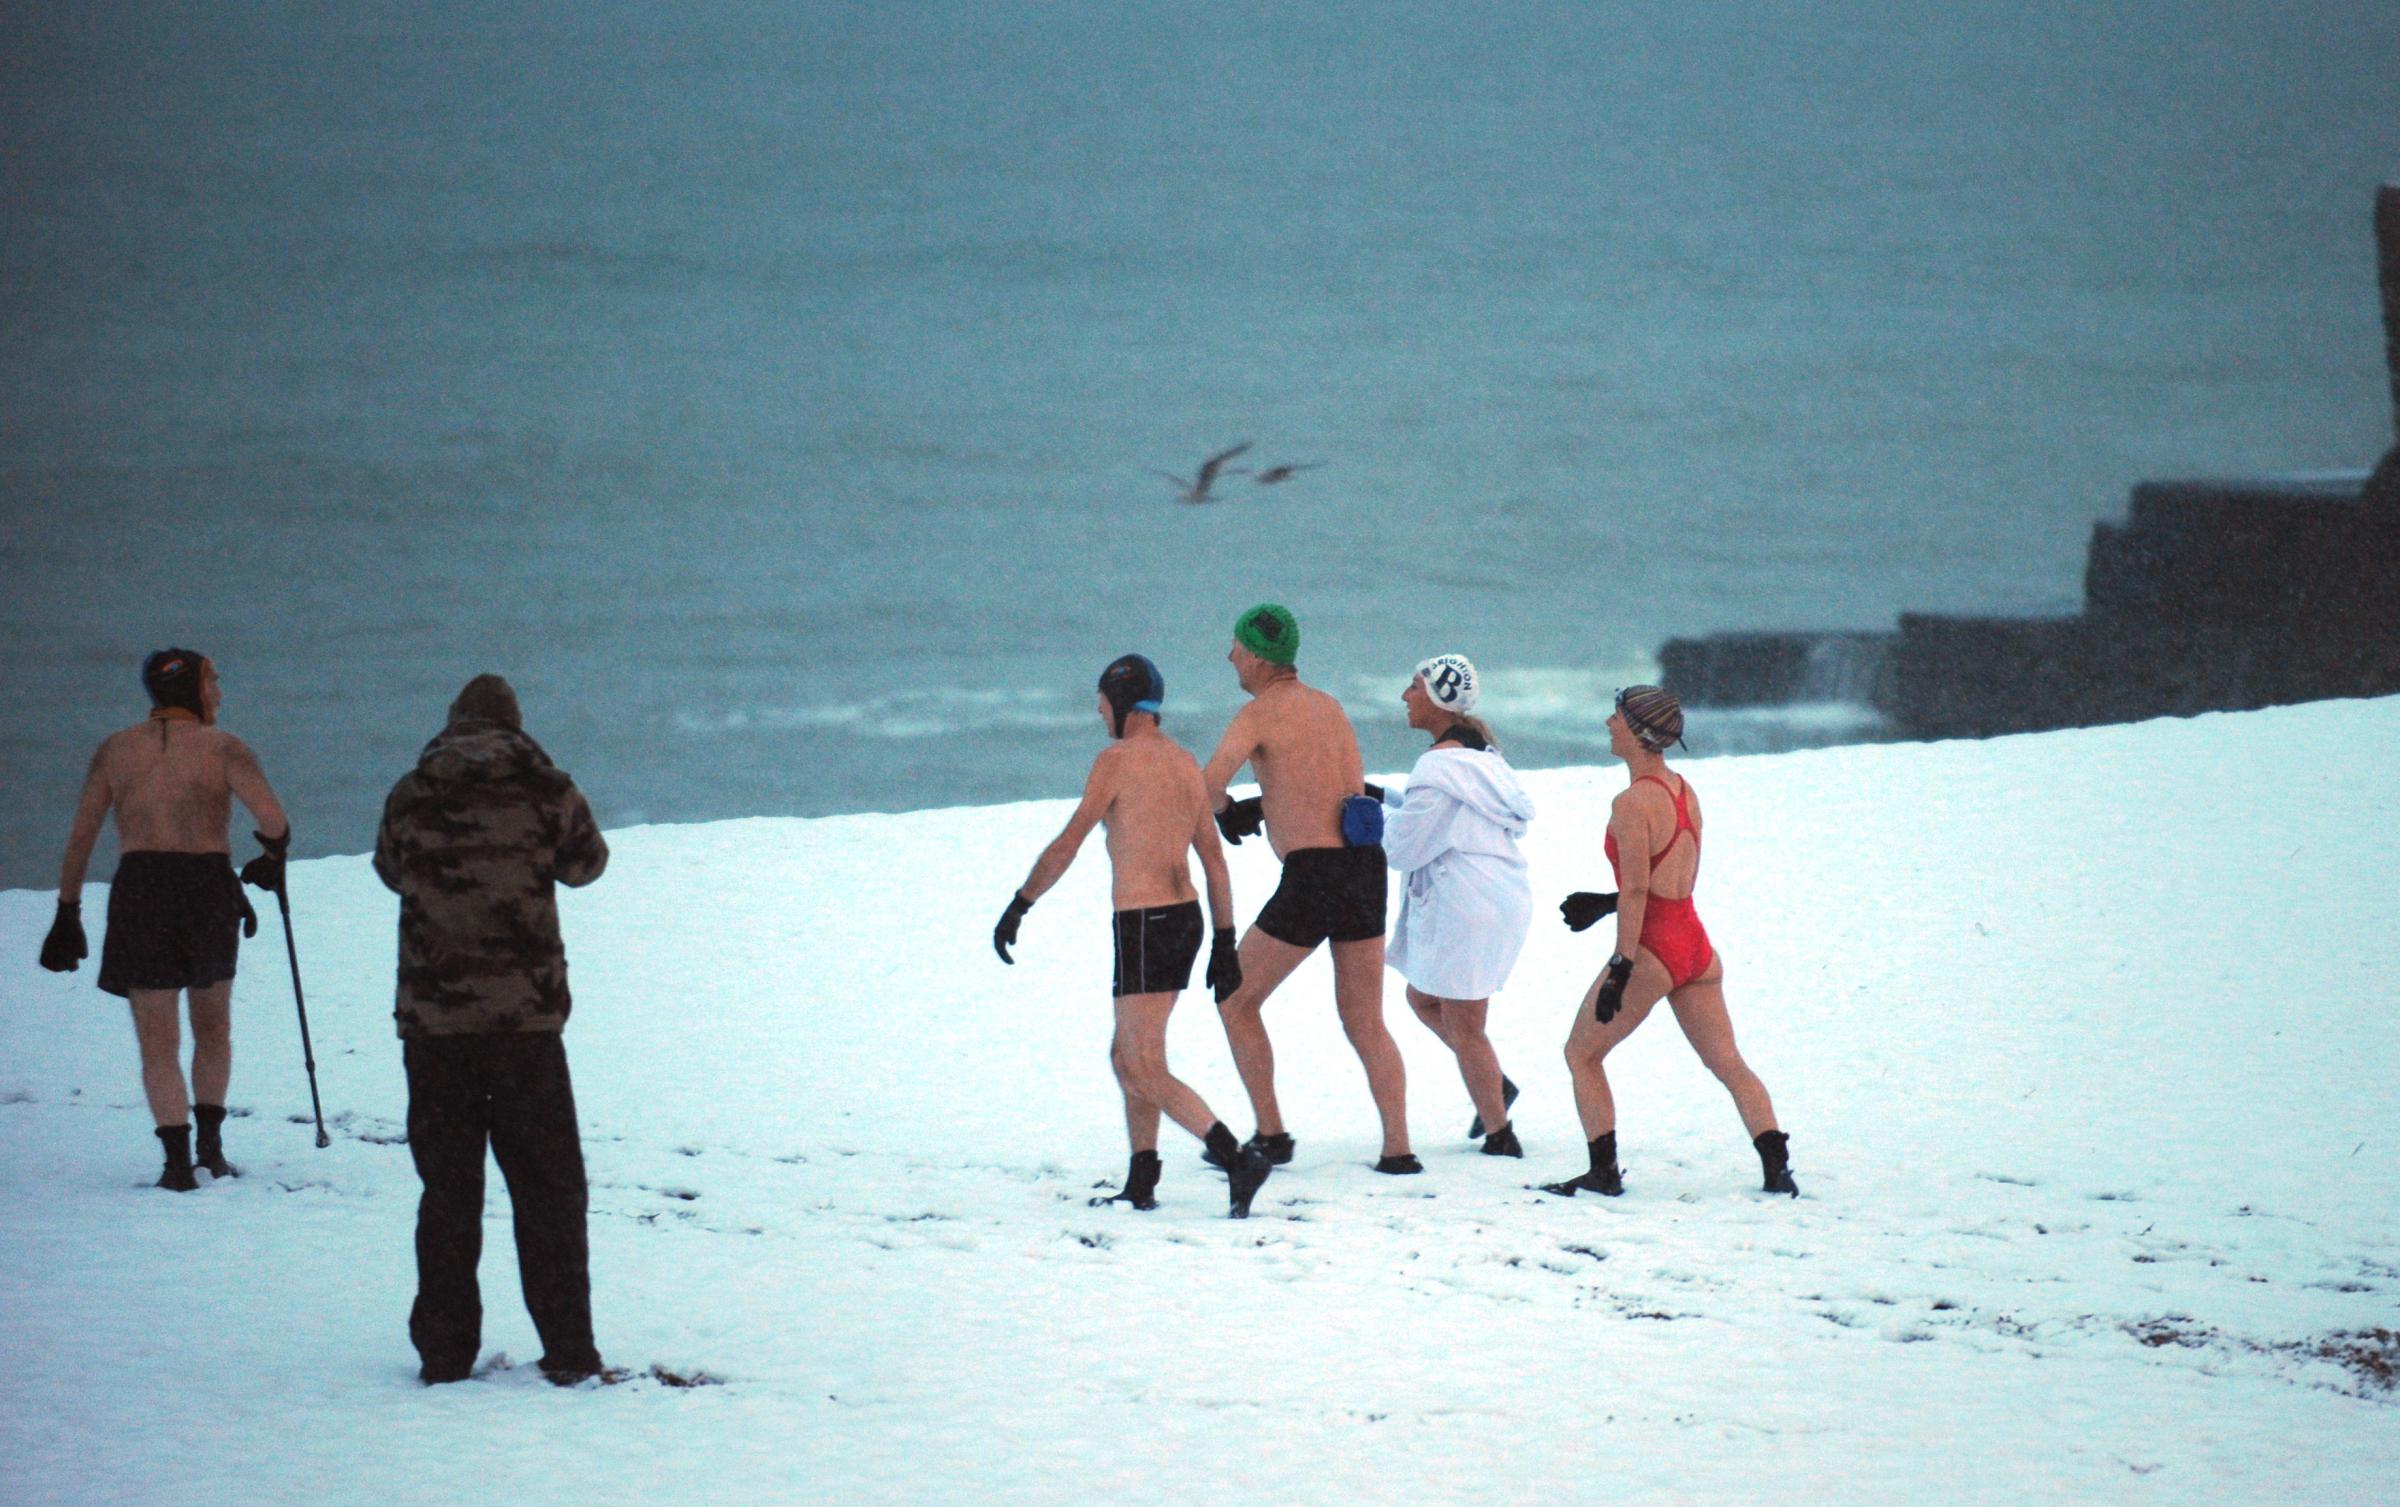 Brighton Swimming Club members out for their daily dip despite the weather after more snow fell this morning causing chaos in the city again.Photograph taken by Simon Dack 13 january 2010.